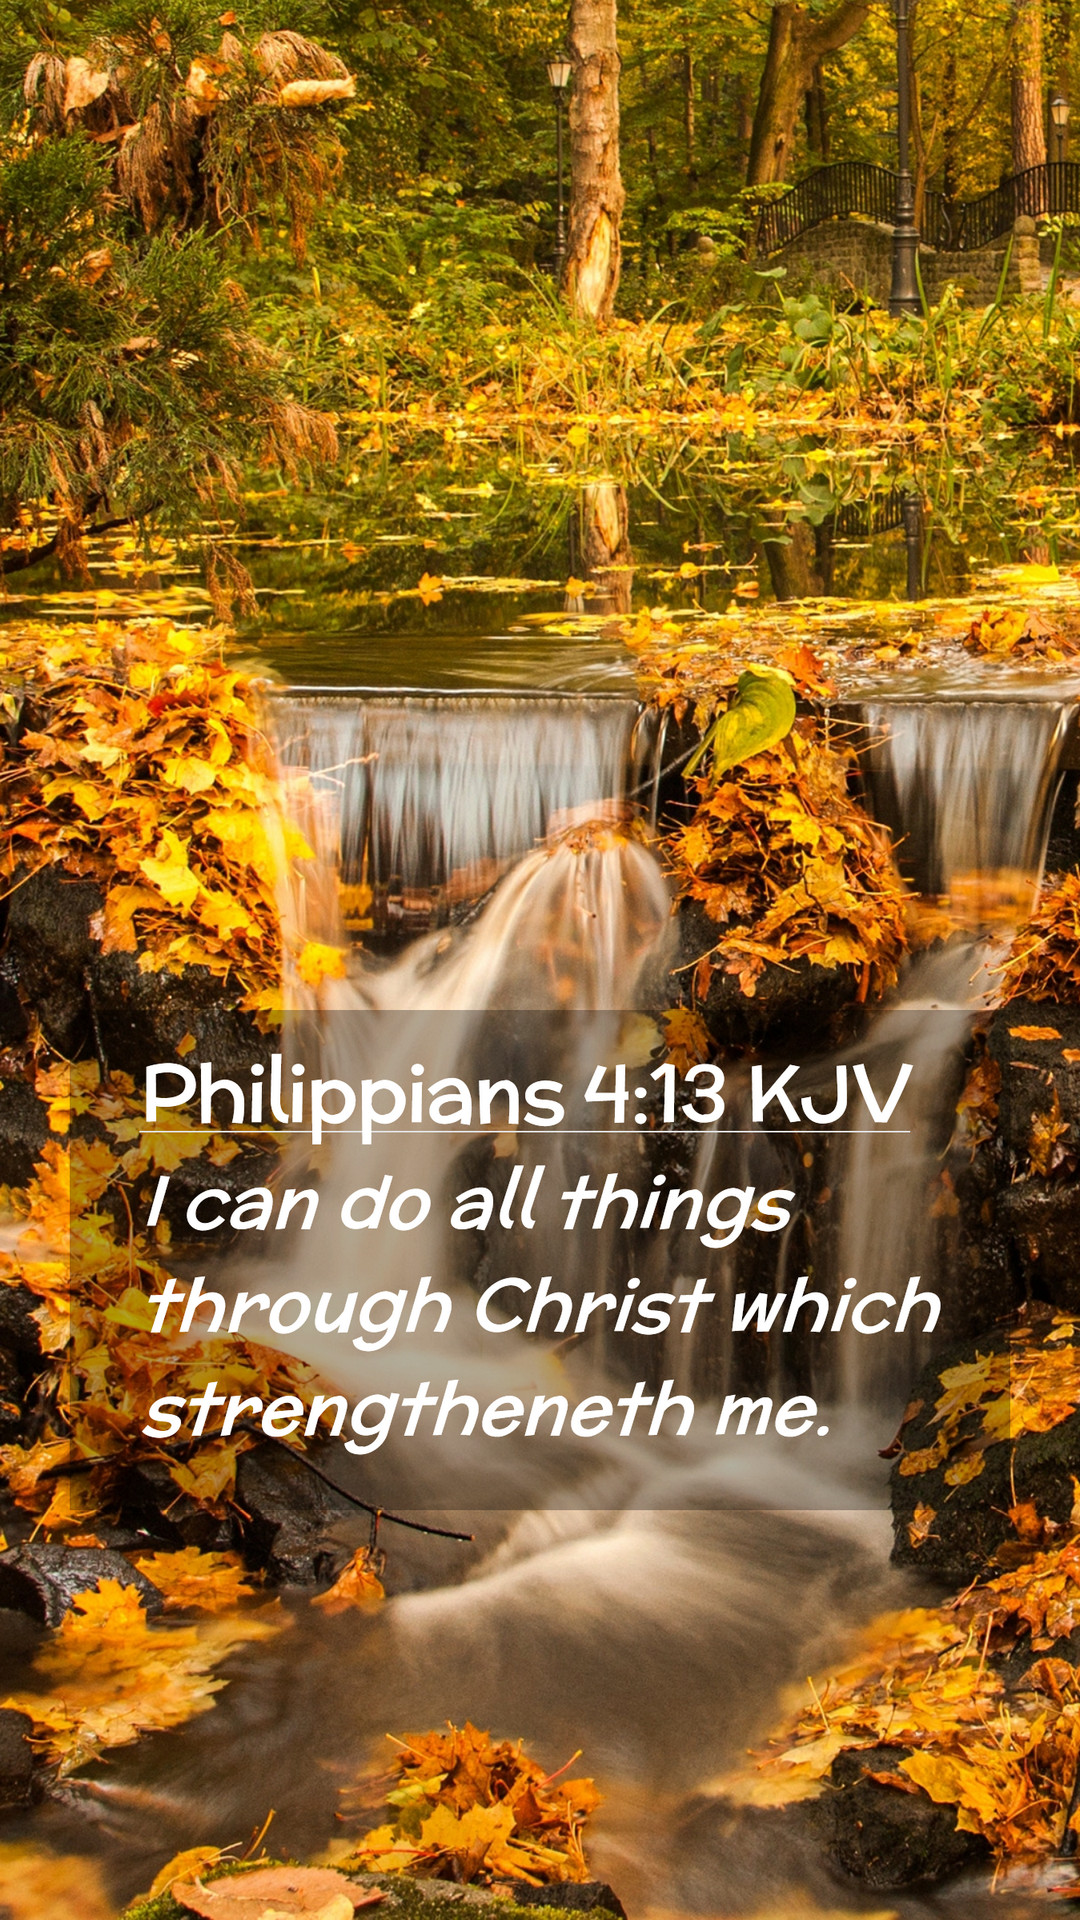 Philippians 4:13 KJV Mobile Phone Wallpaper can do all things through Christ which